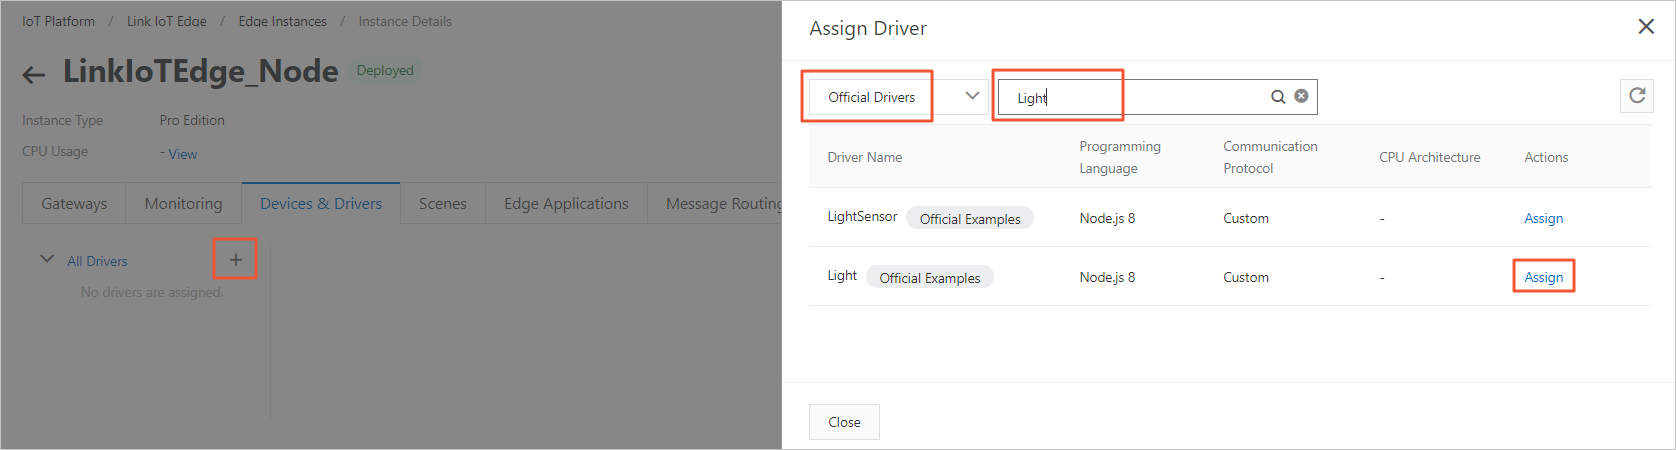 Assign Driver panel